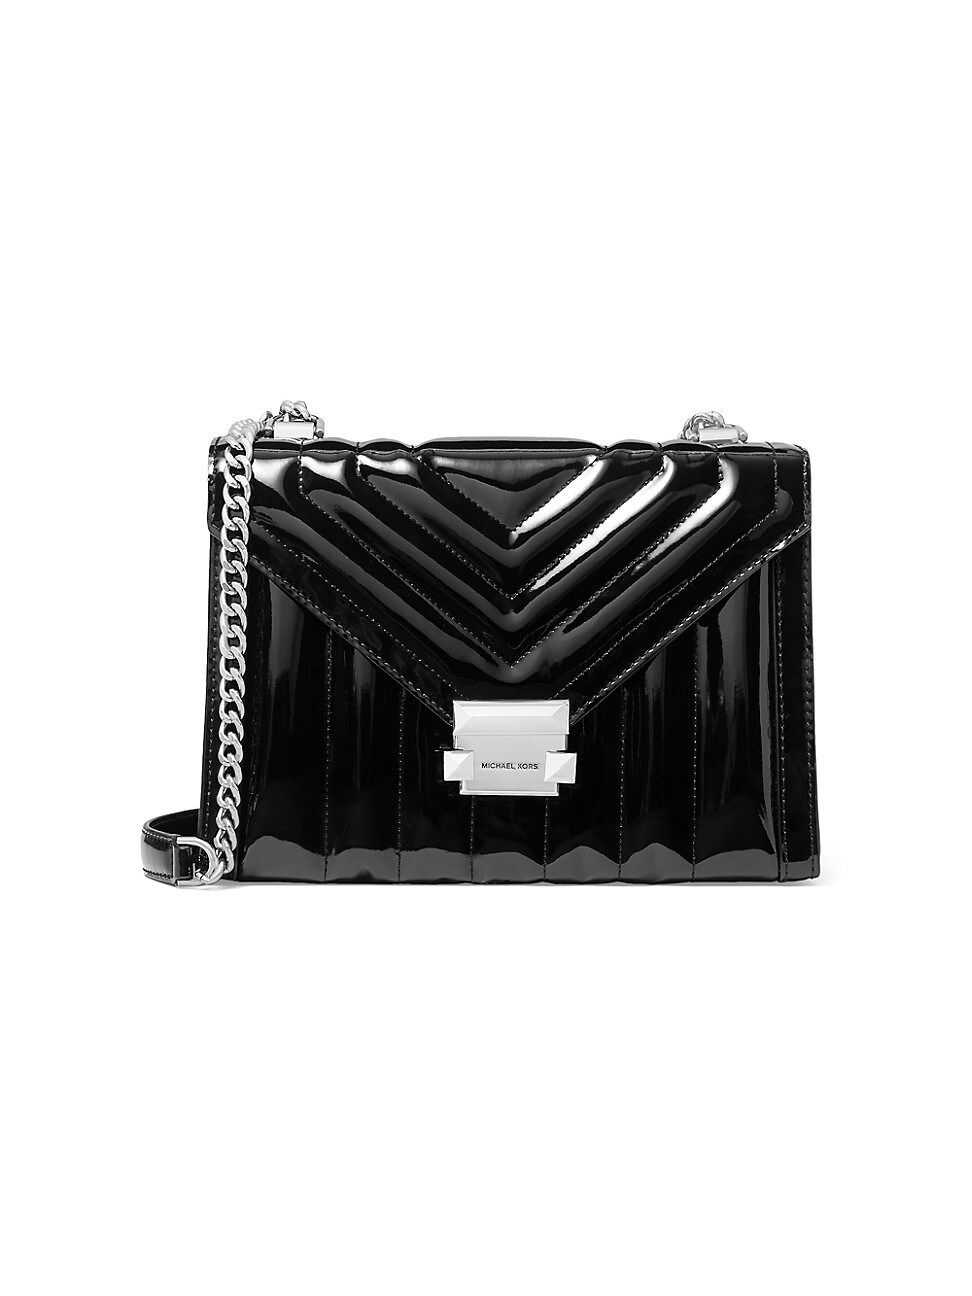 MICHAEL Michael Kors Women's Whitney Quilted Patent Leather Shoulder Bag - Black | Saks Fifth Avenue